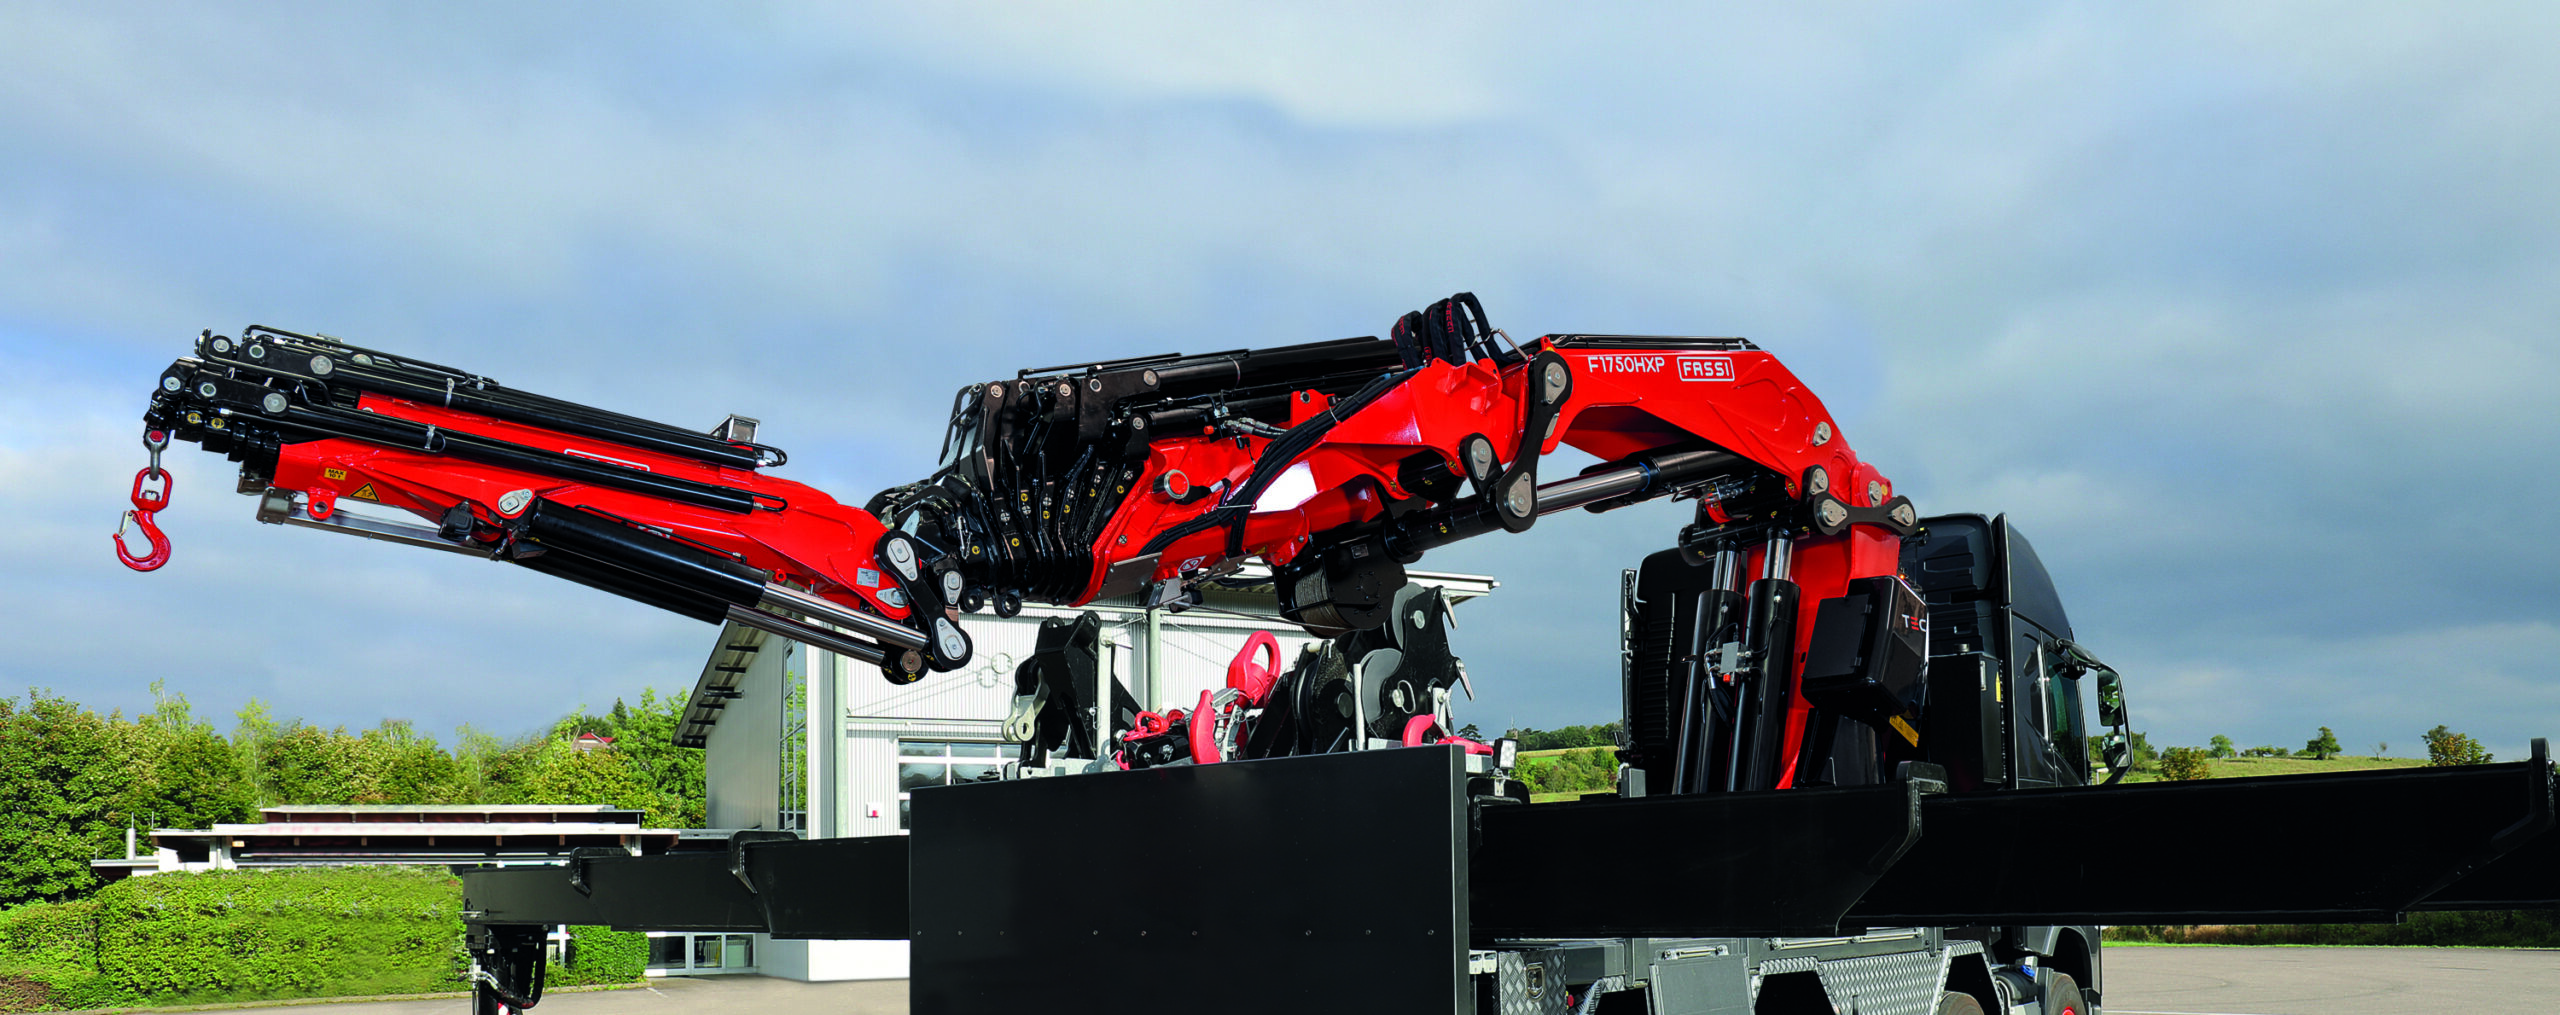 Two New Crane Models By Fassi To Be Launched In Autumn 2022 The Heavyquip Magazine